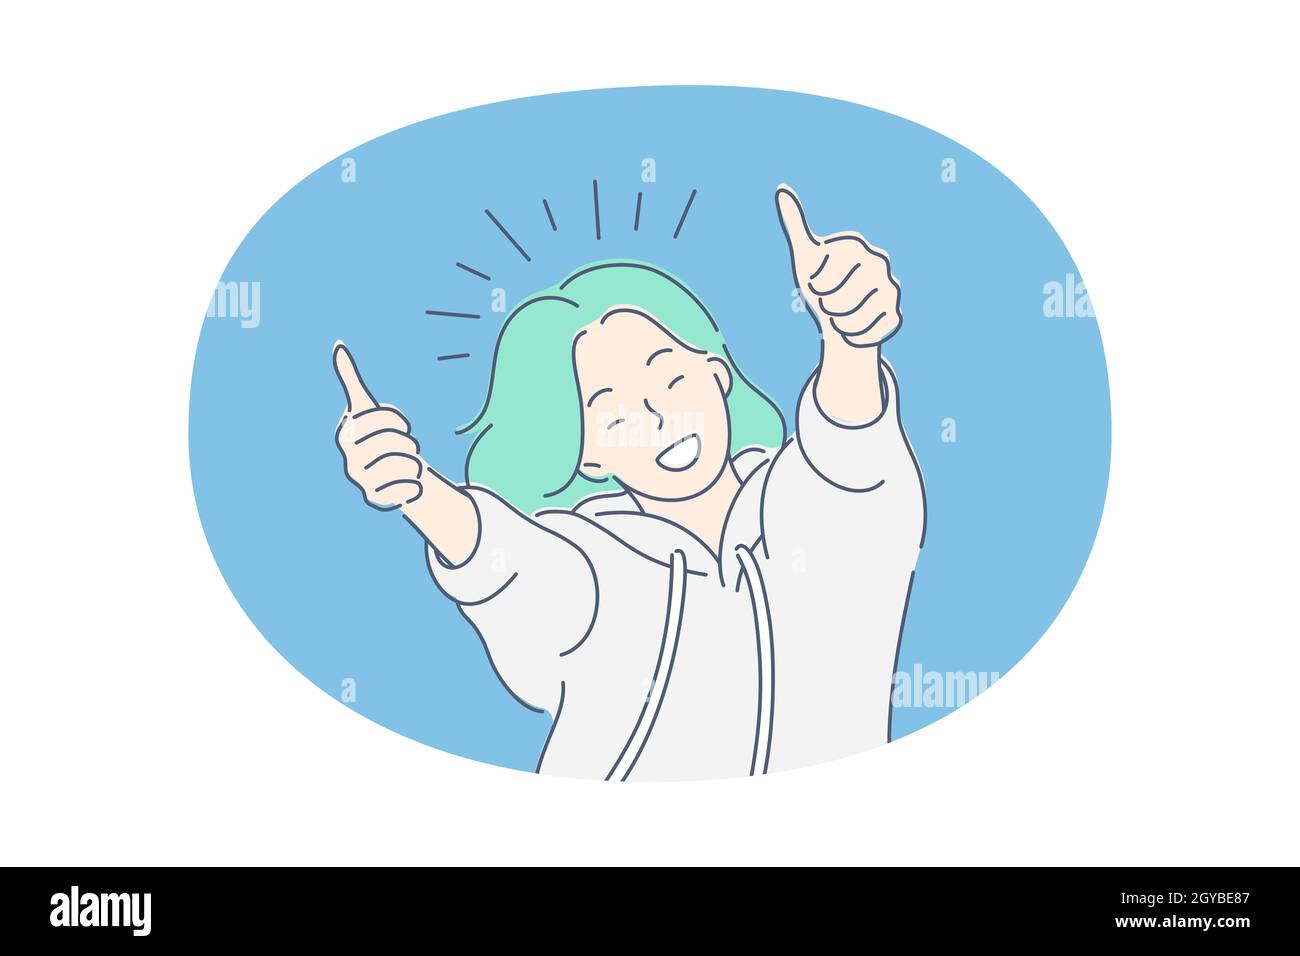 Woman expressing positive emotions concept. Young smiling woman cartoon character feeling happy and showing thumbs up good signs with fingers, showing Stock Photo